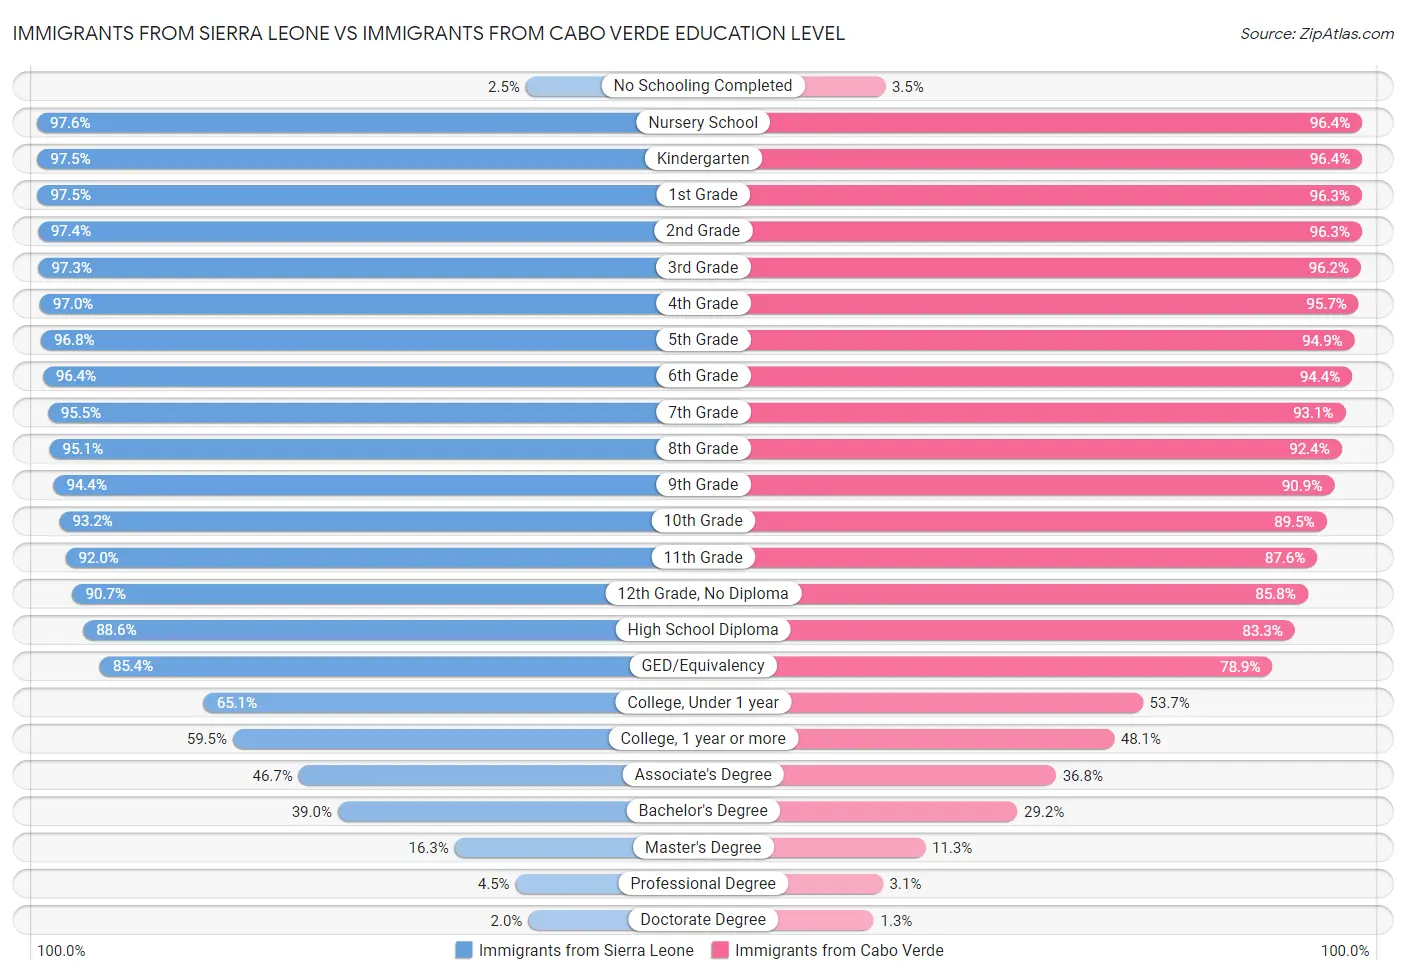 Immigrants from Sierra Leone vs Immigrants from Cabo Verde Education Level